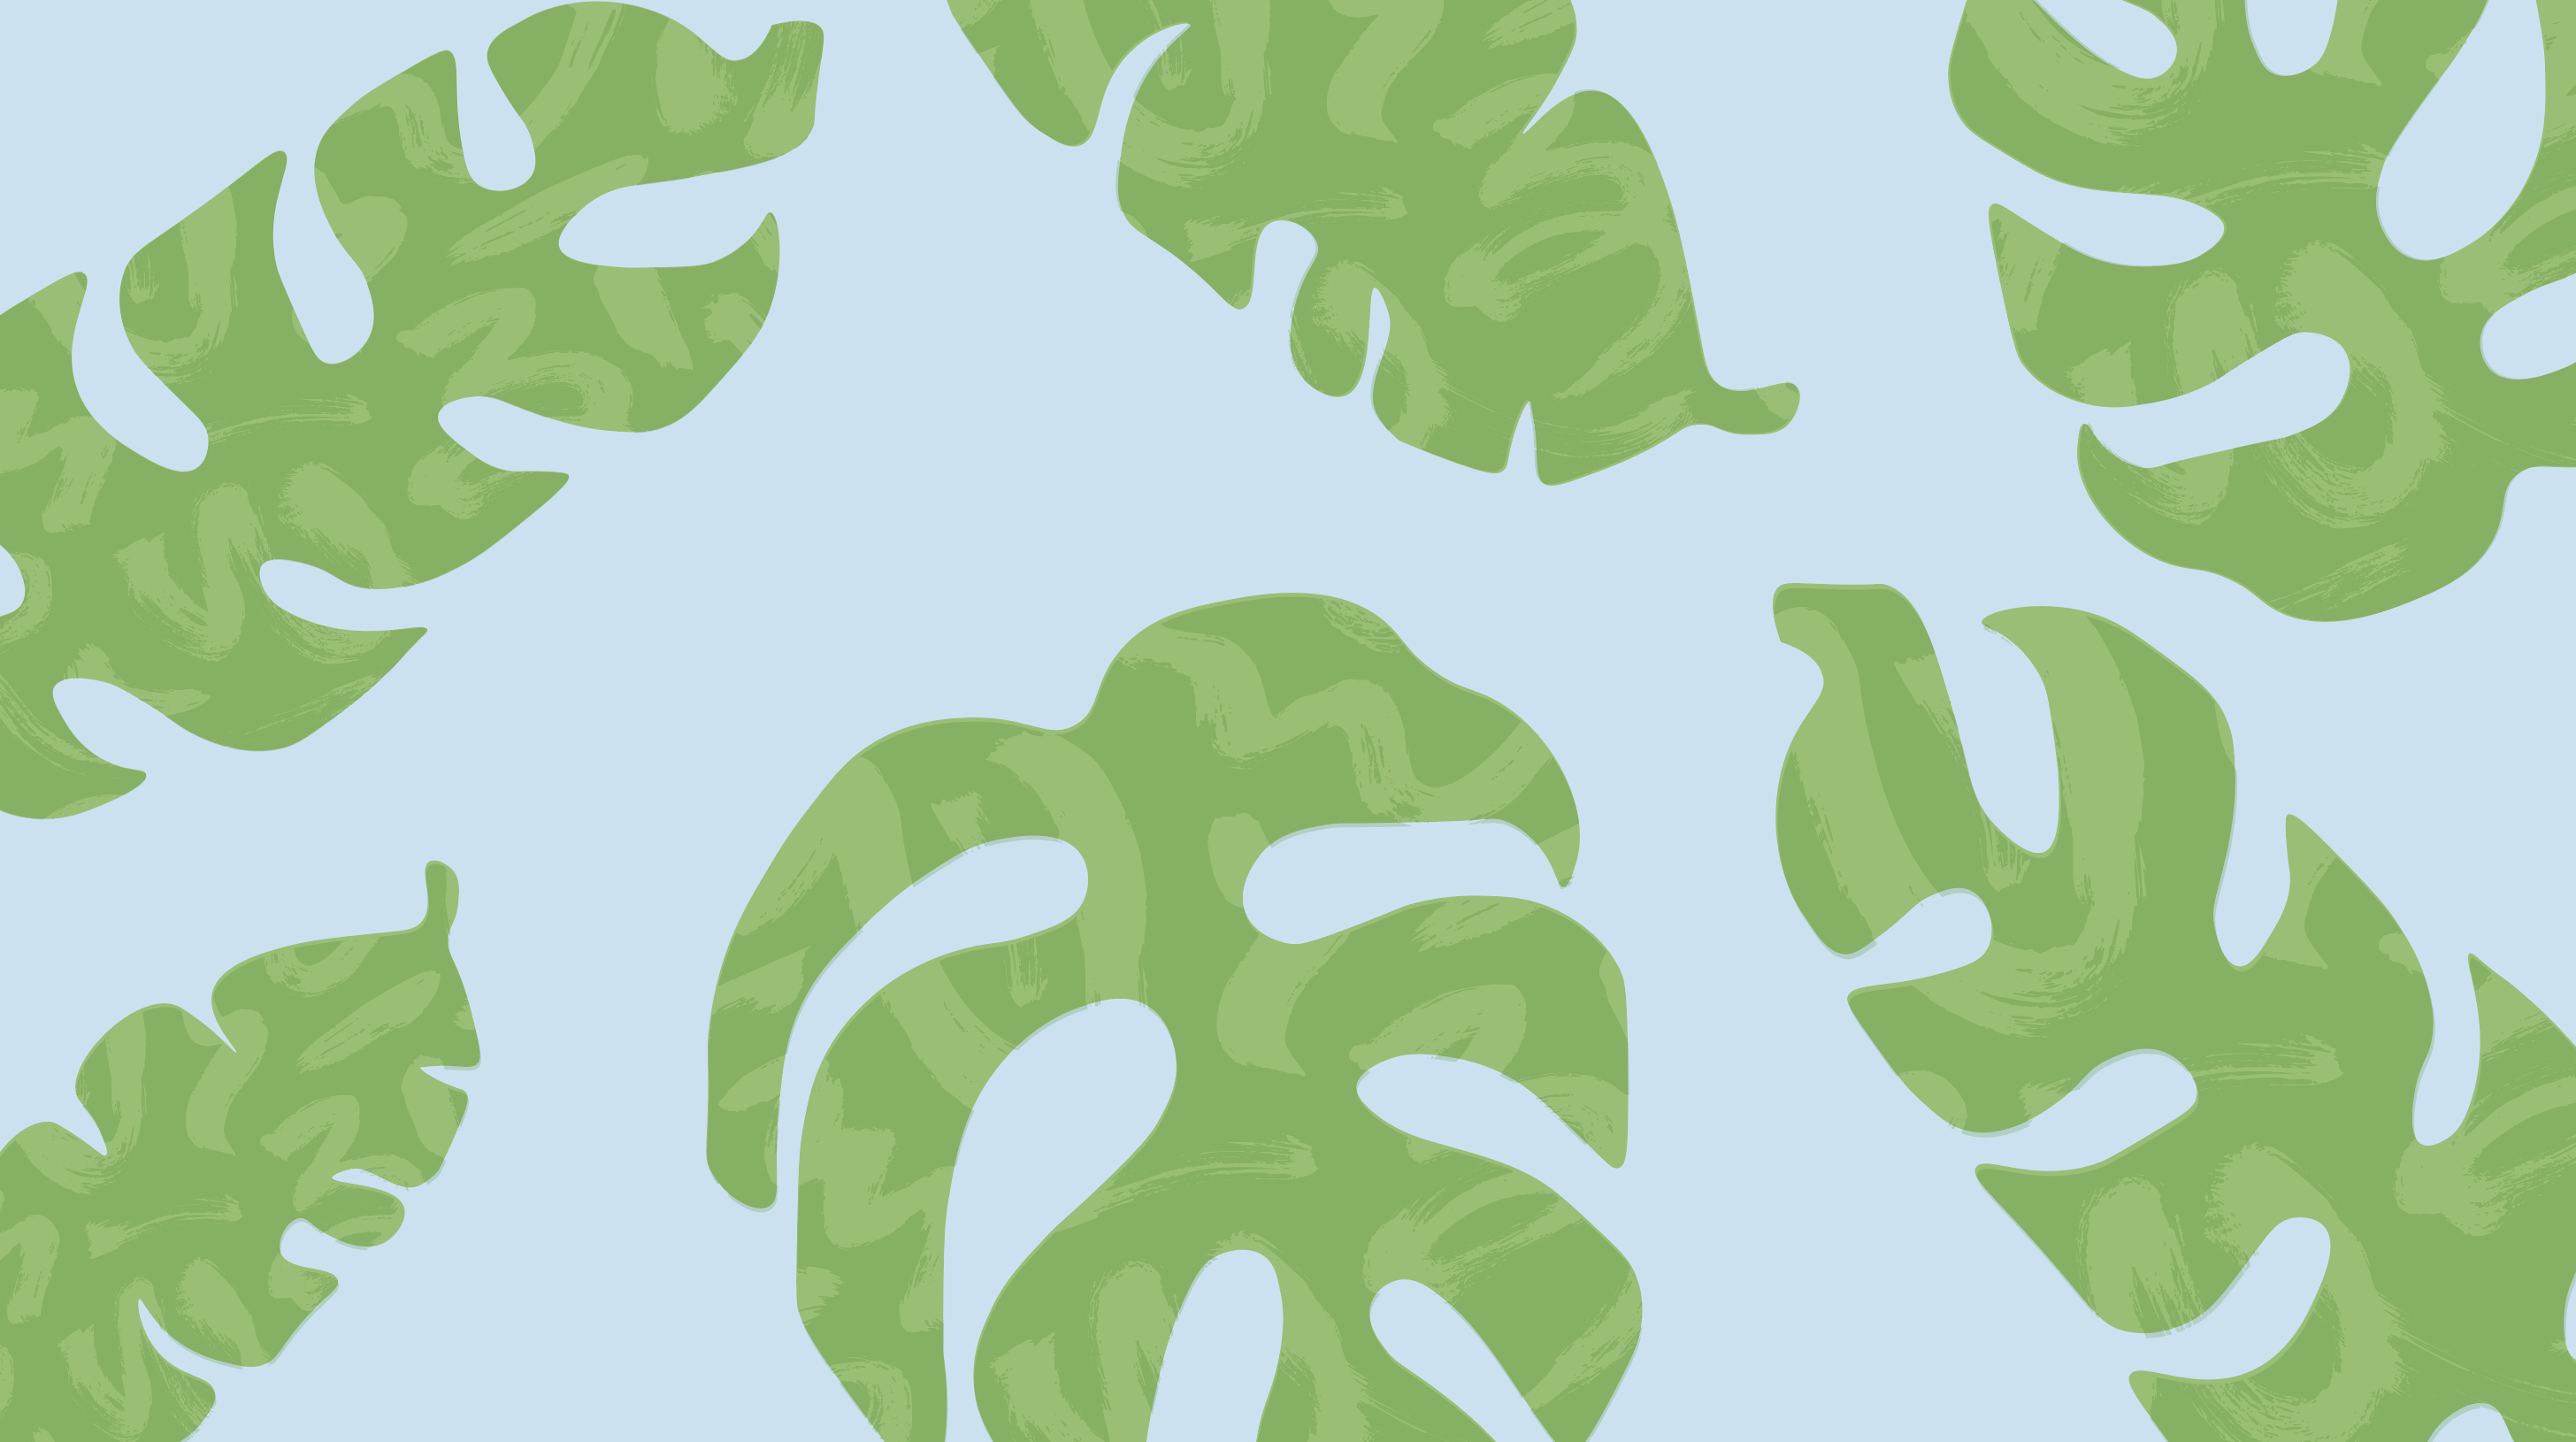 light blue background with drawn green monstera leaves